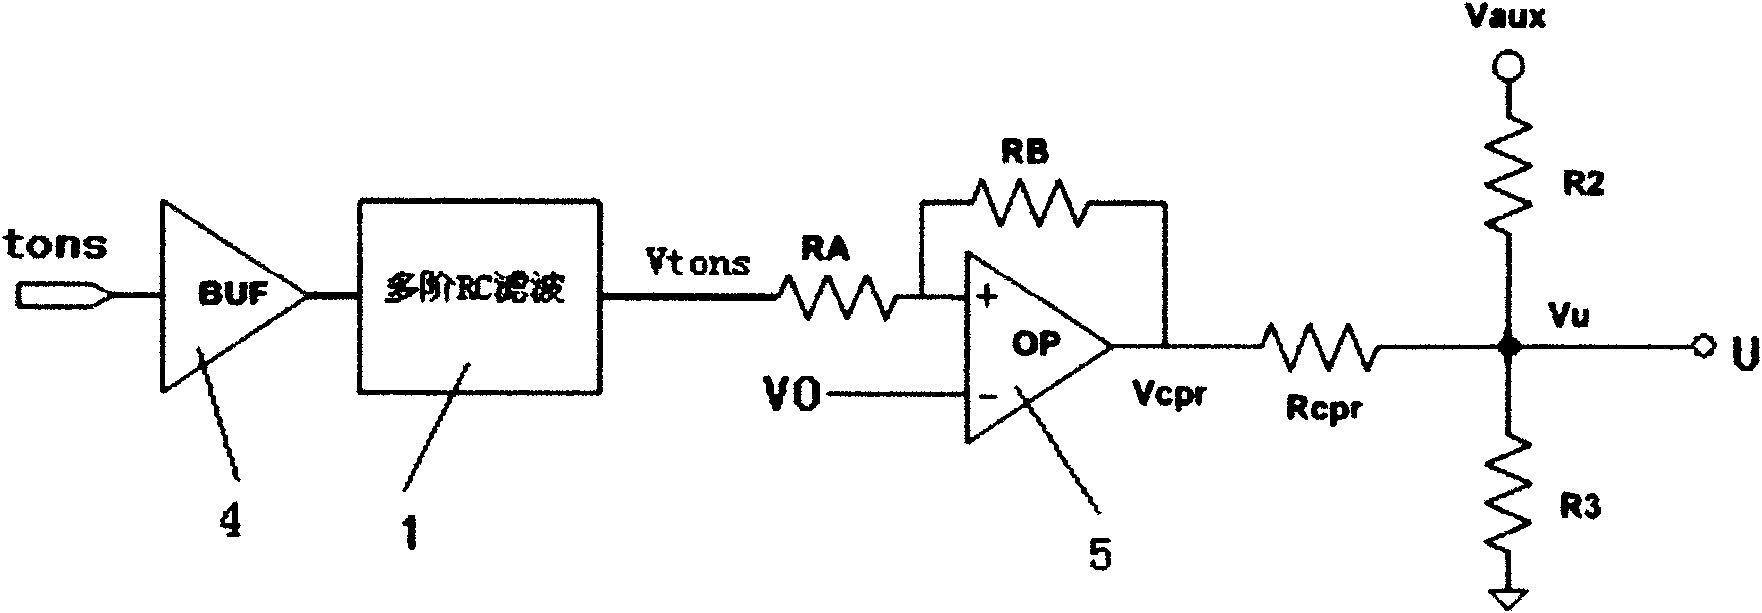 Line loss compensation circuit for switch power supply